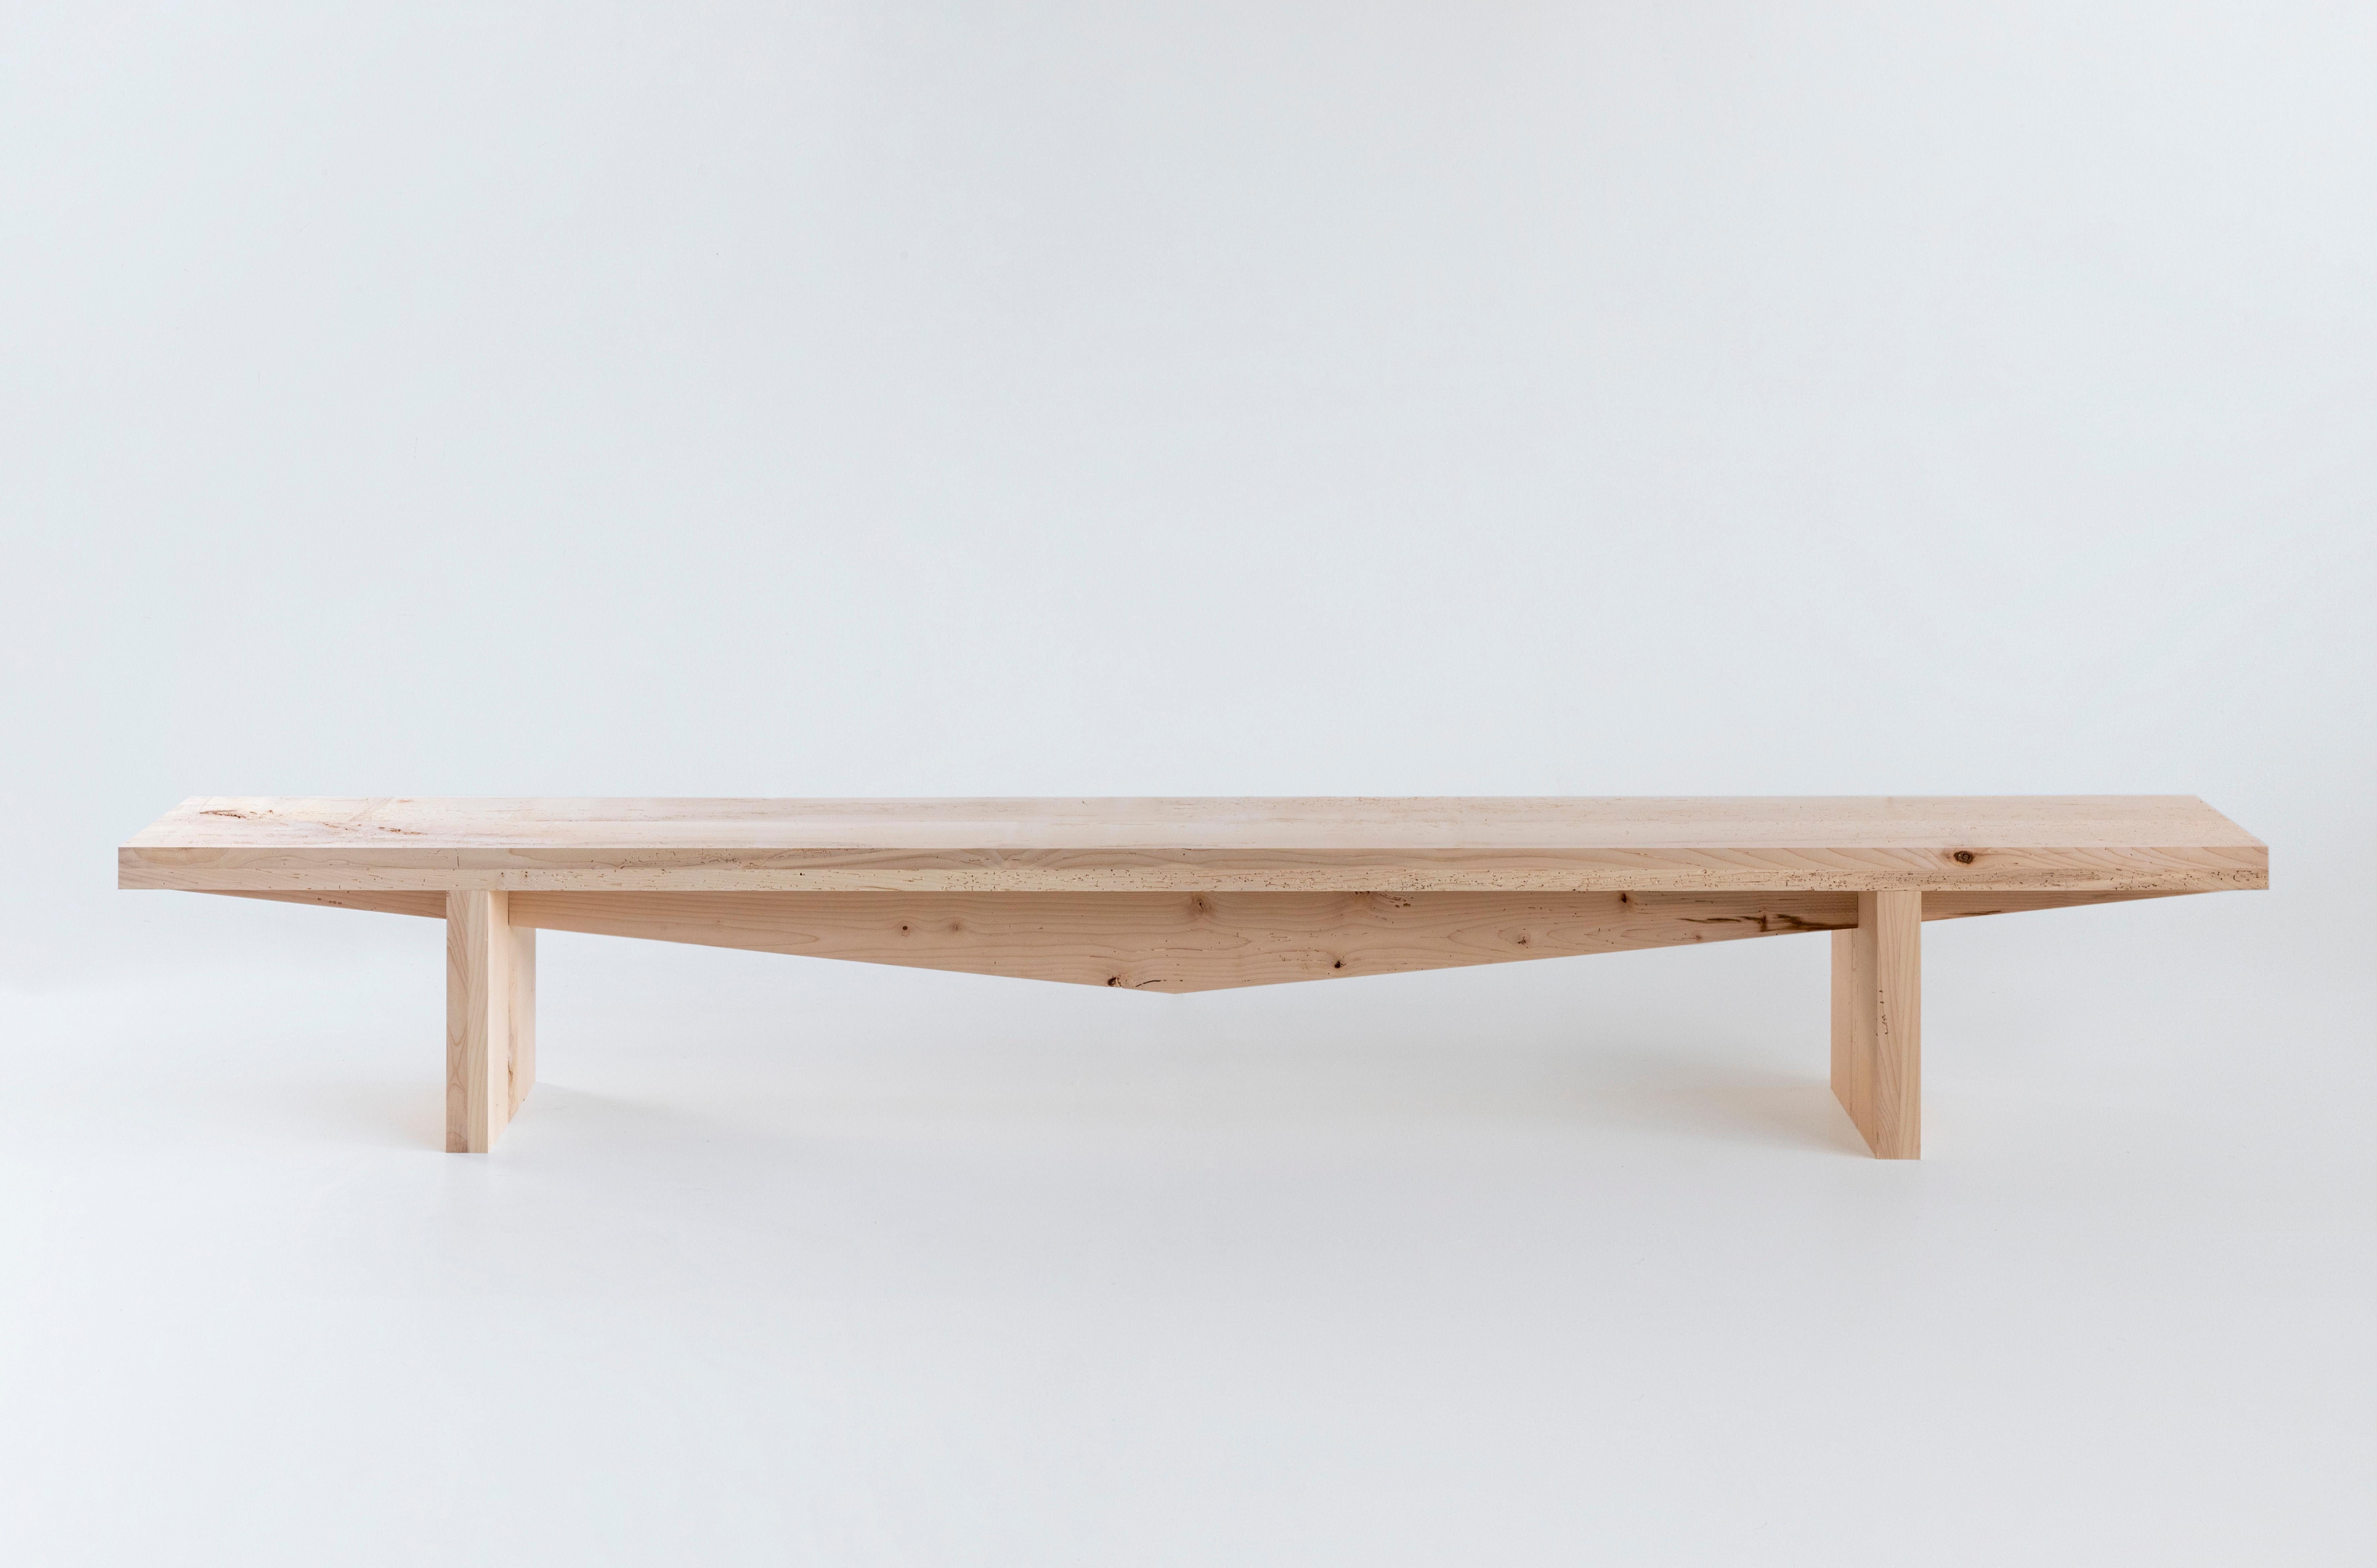 An Oversize bench for generous hospitality.
The double-winged rib positioned under the seat, ensures the right statics for a seat that can accommodate 'n' people.
This piece is made in Maple recovered wood, other kind of wood is possible on